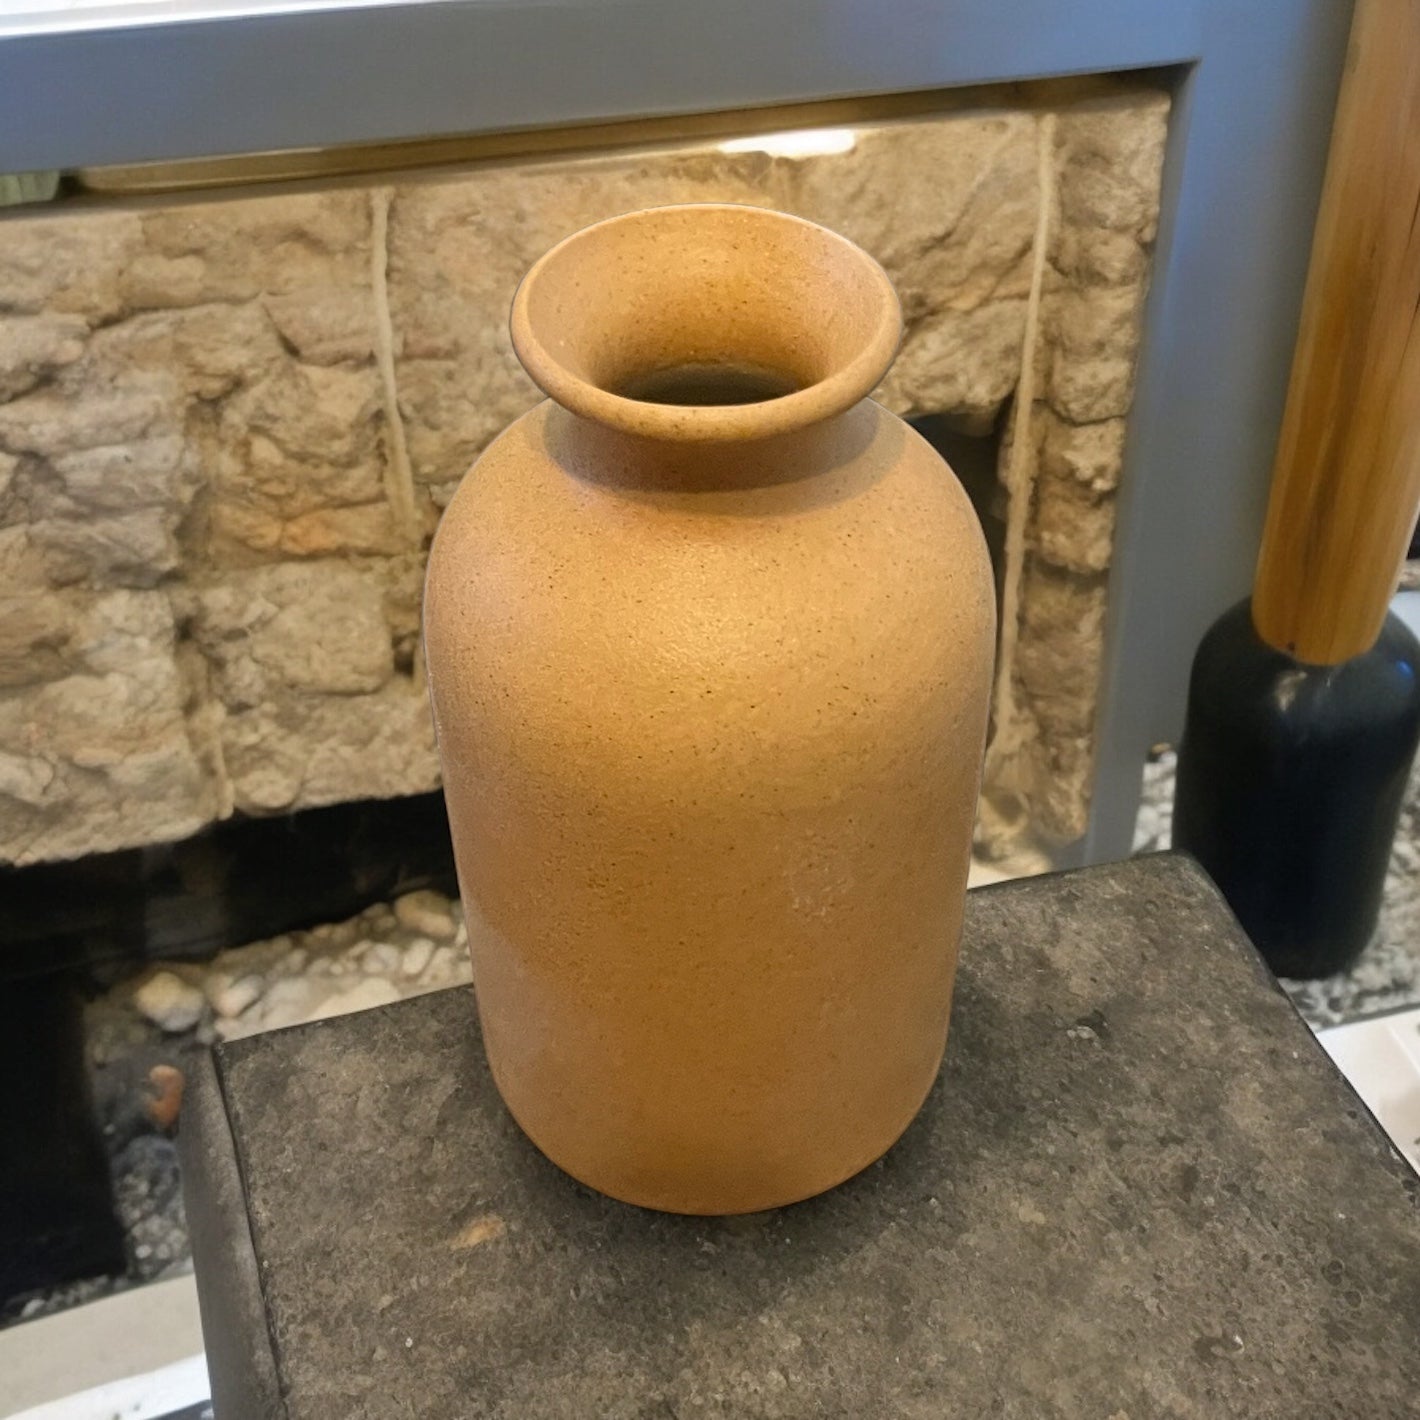 top view if the vase to show where flowers are inserted